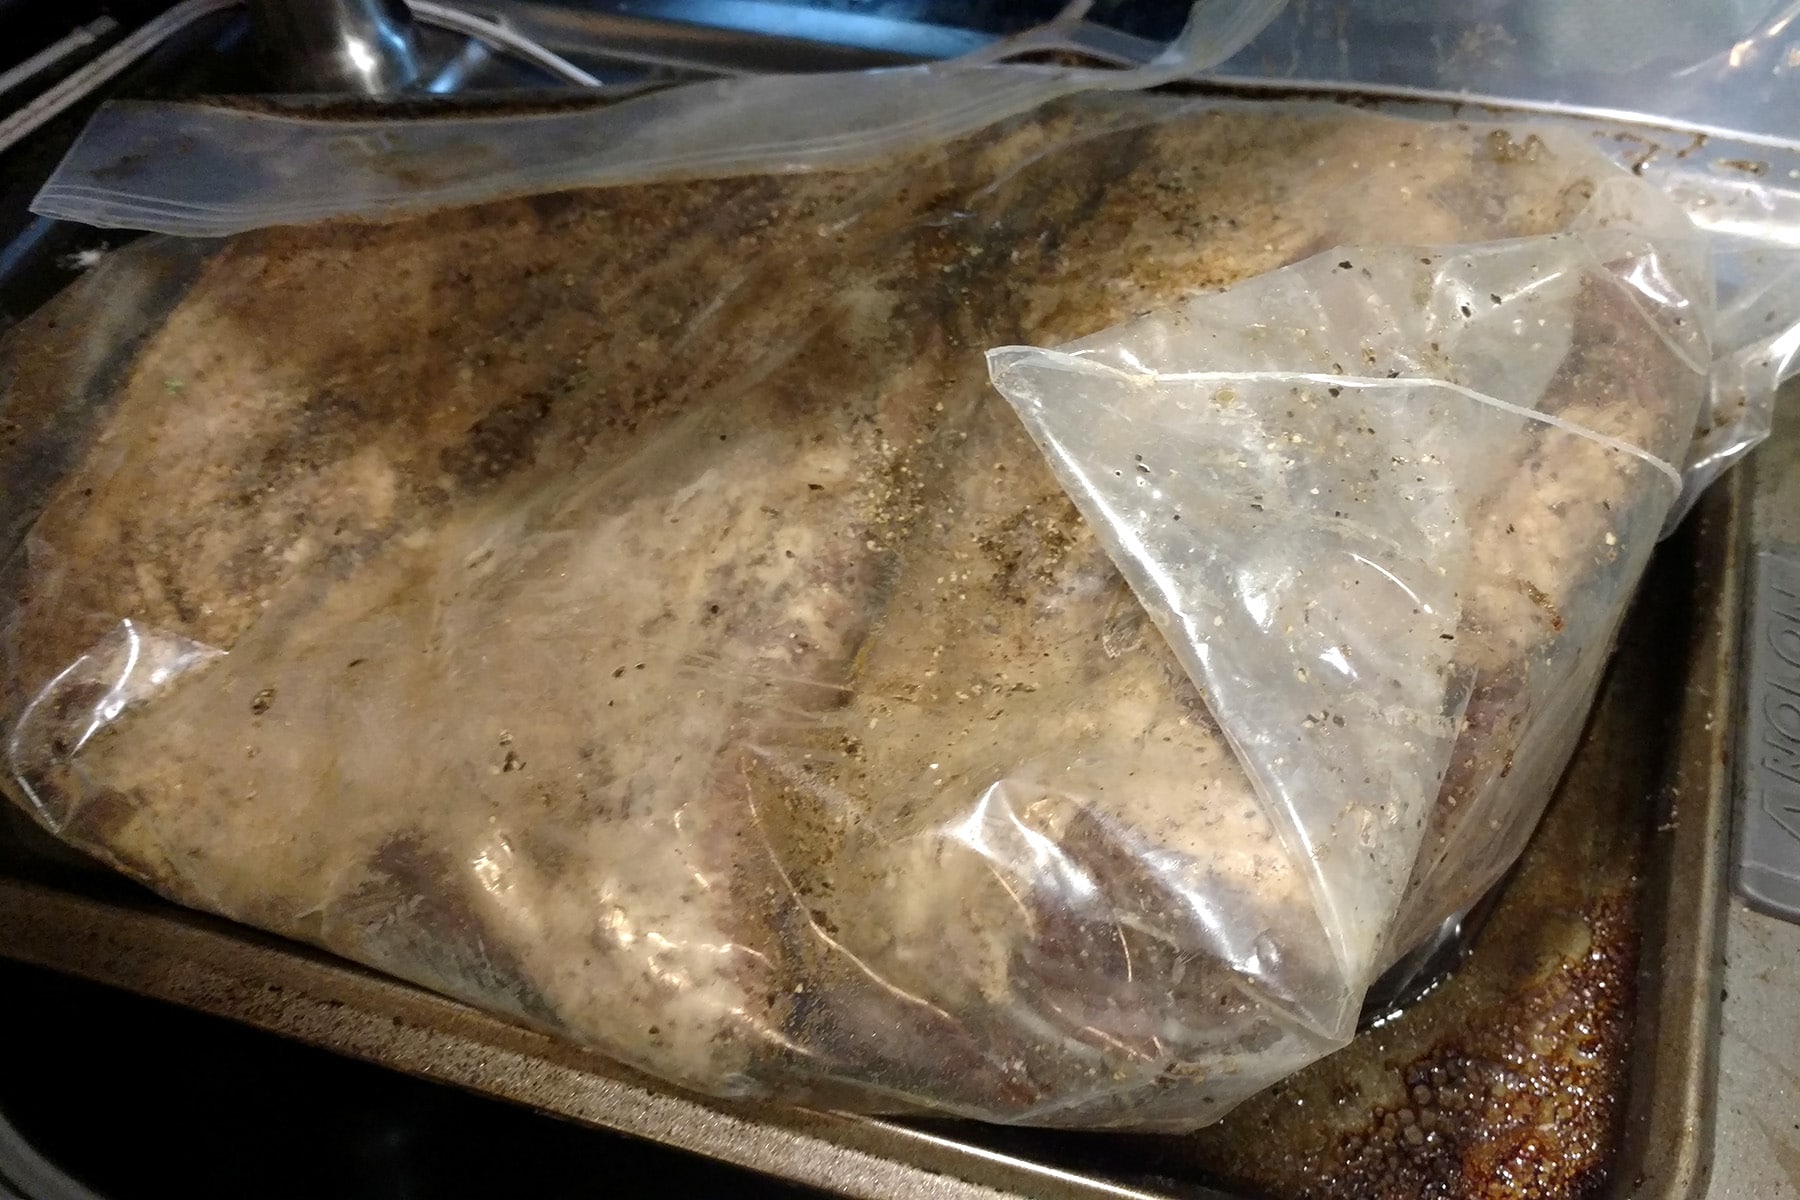 A large slab of meat is curing in a large plastic bag.